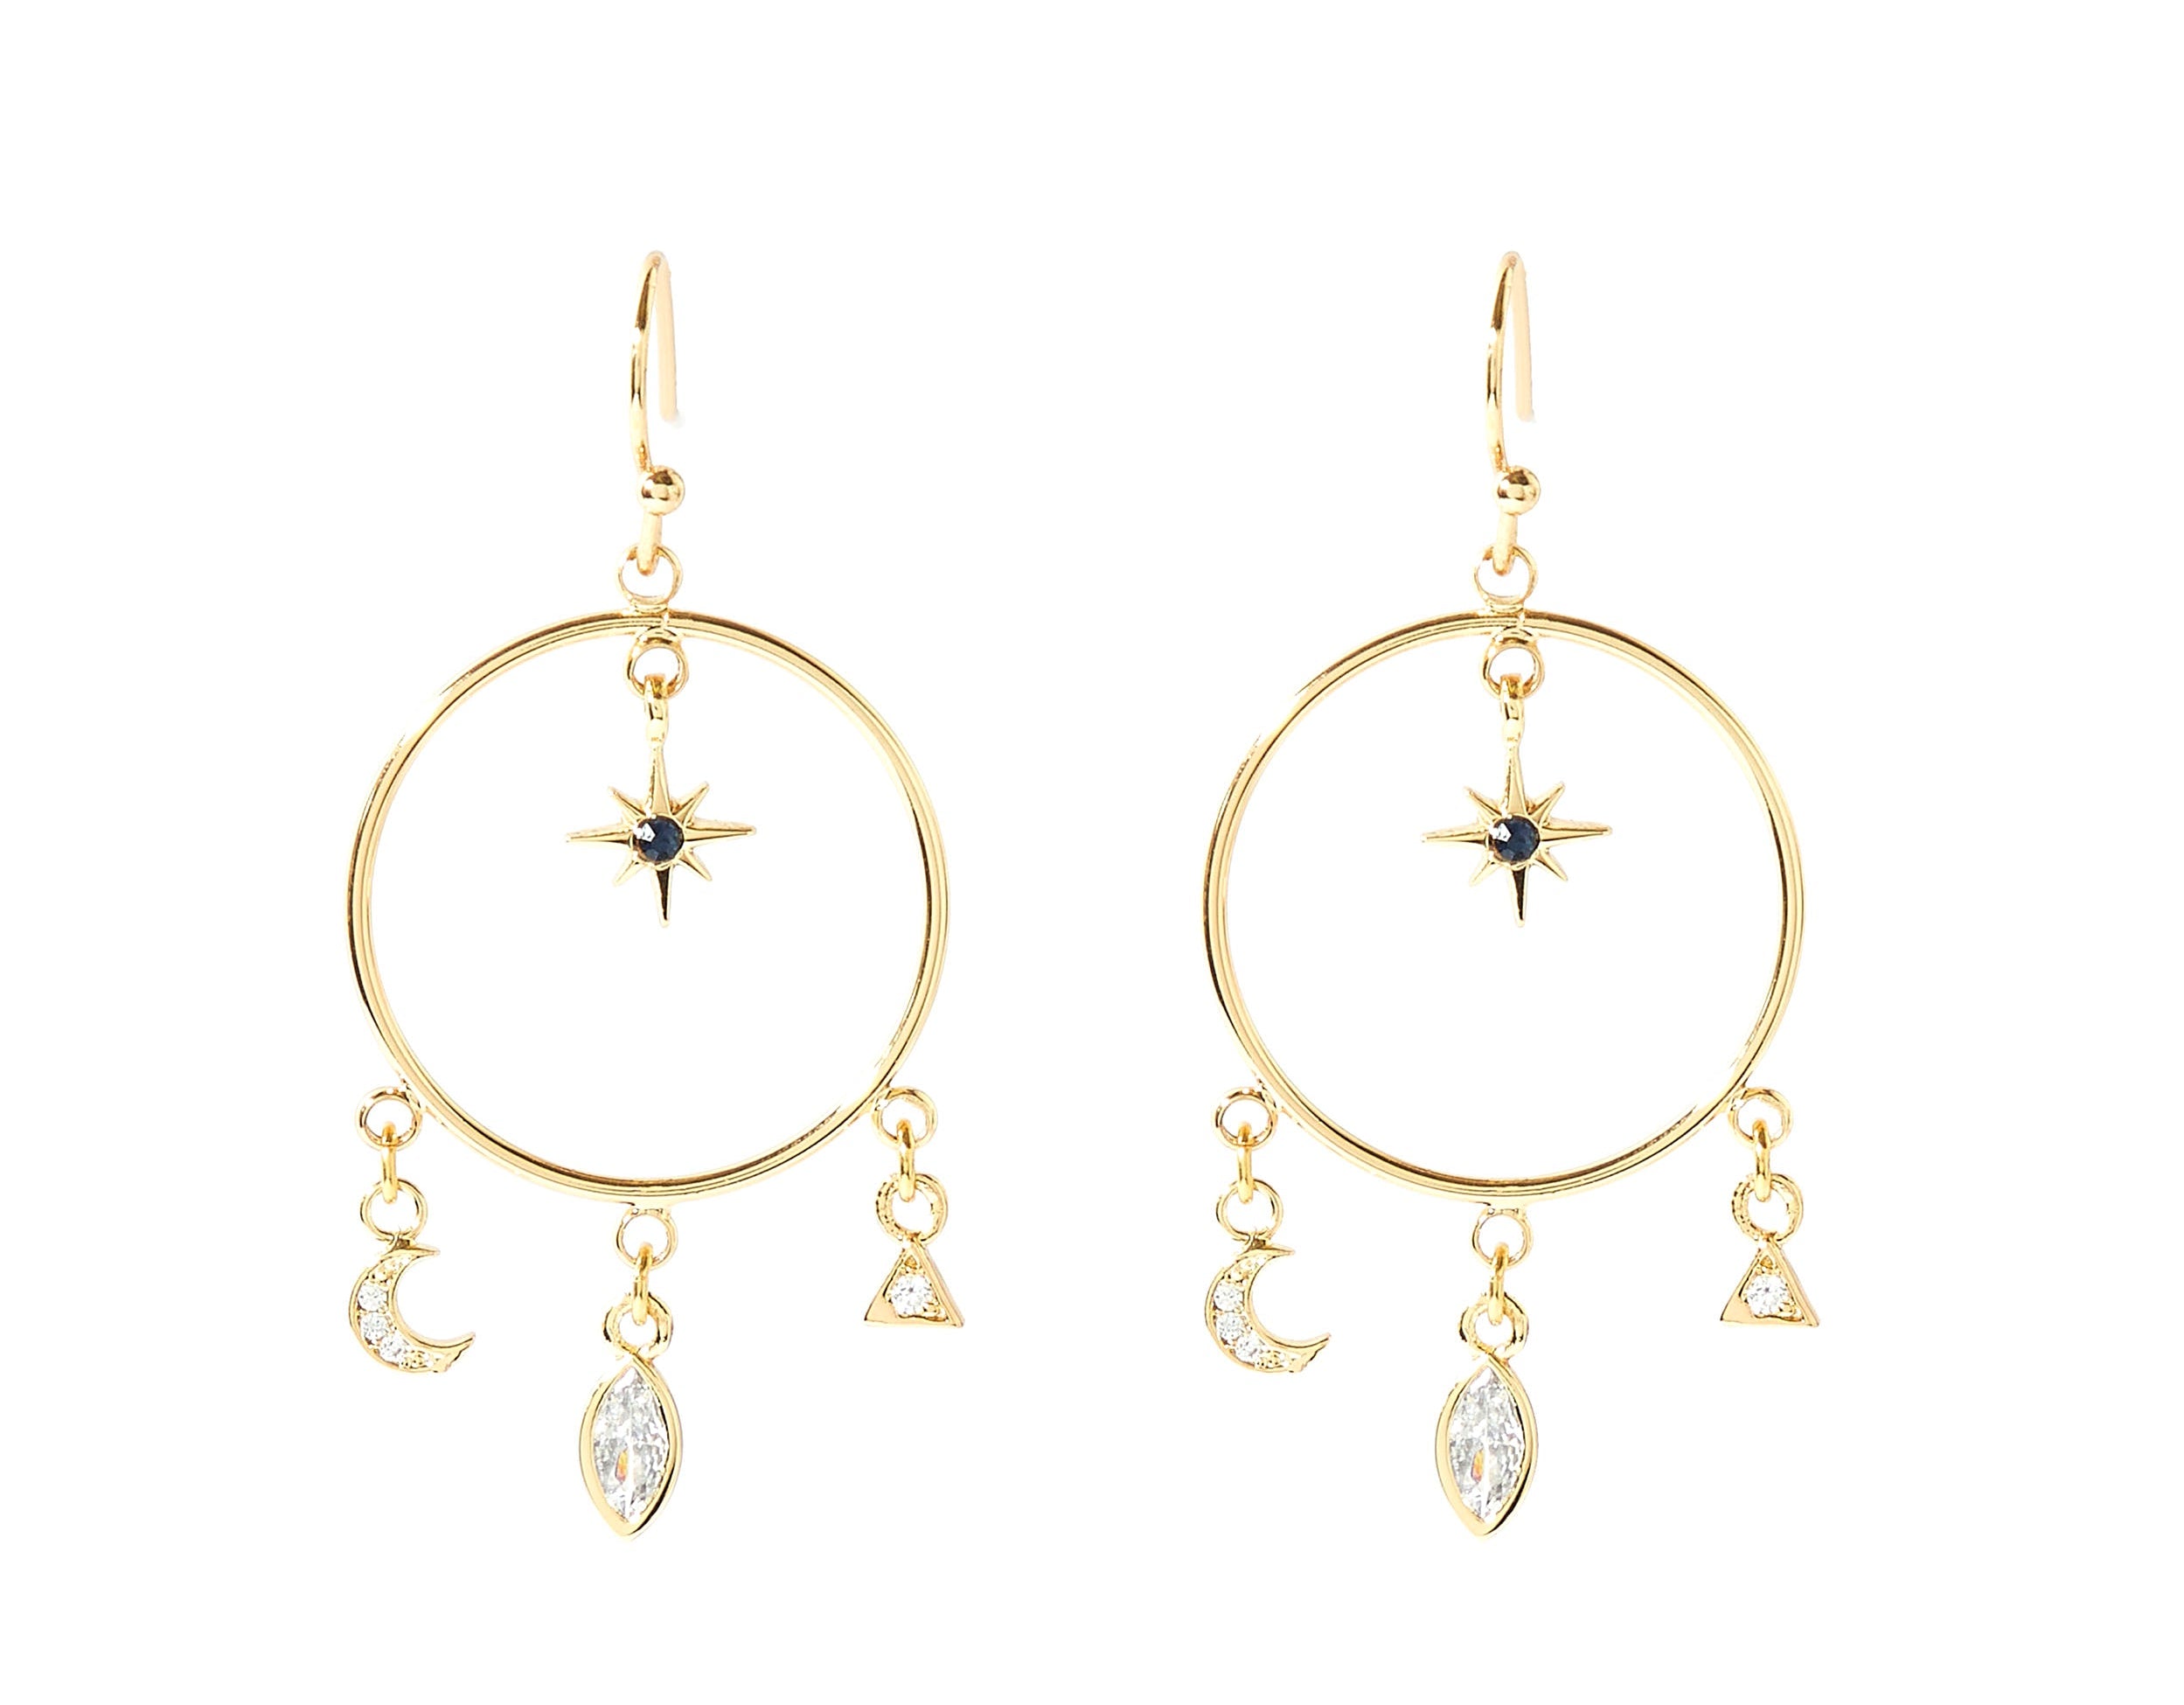 Real Gold Plated Celestial Dreamcatcher Earrings For Women By Accessorize London